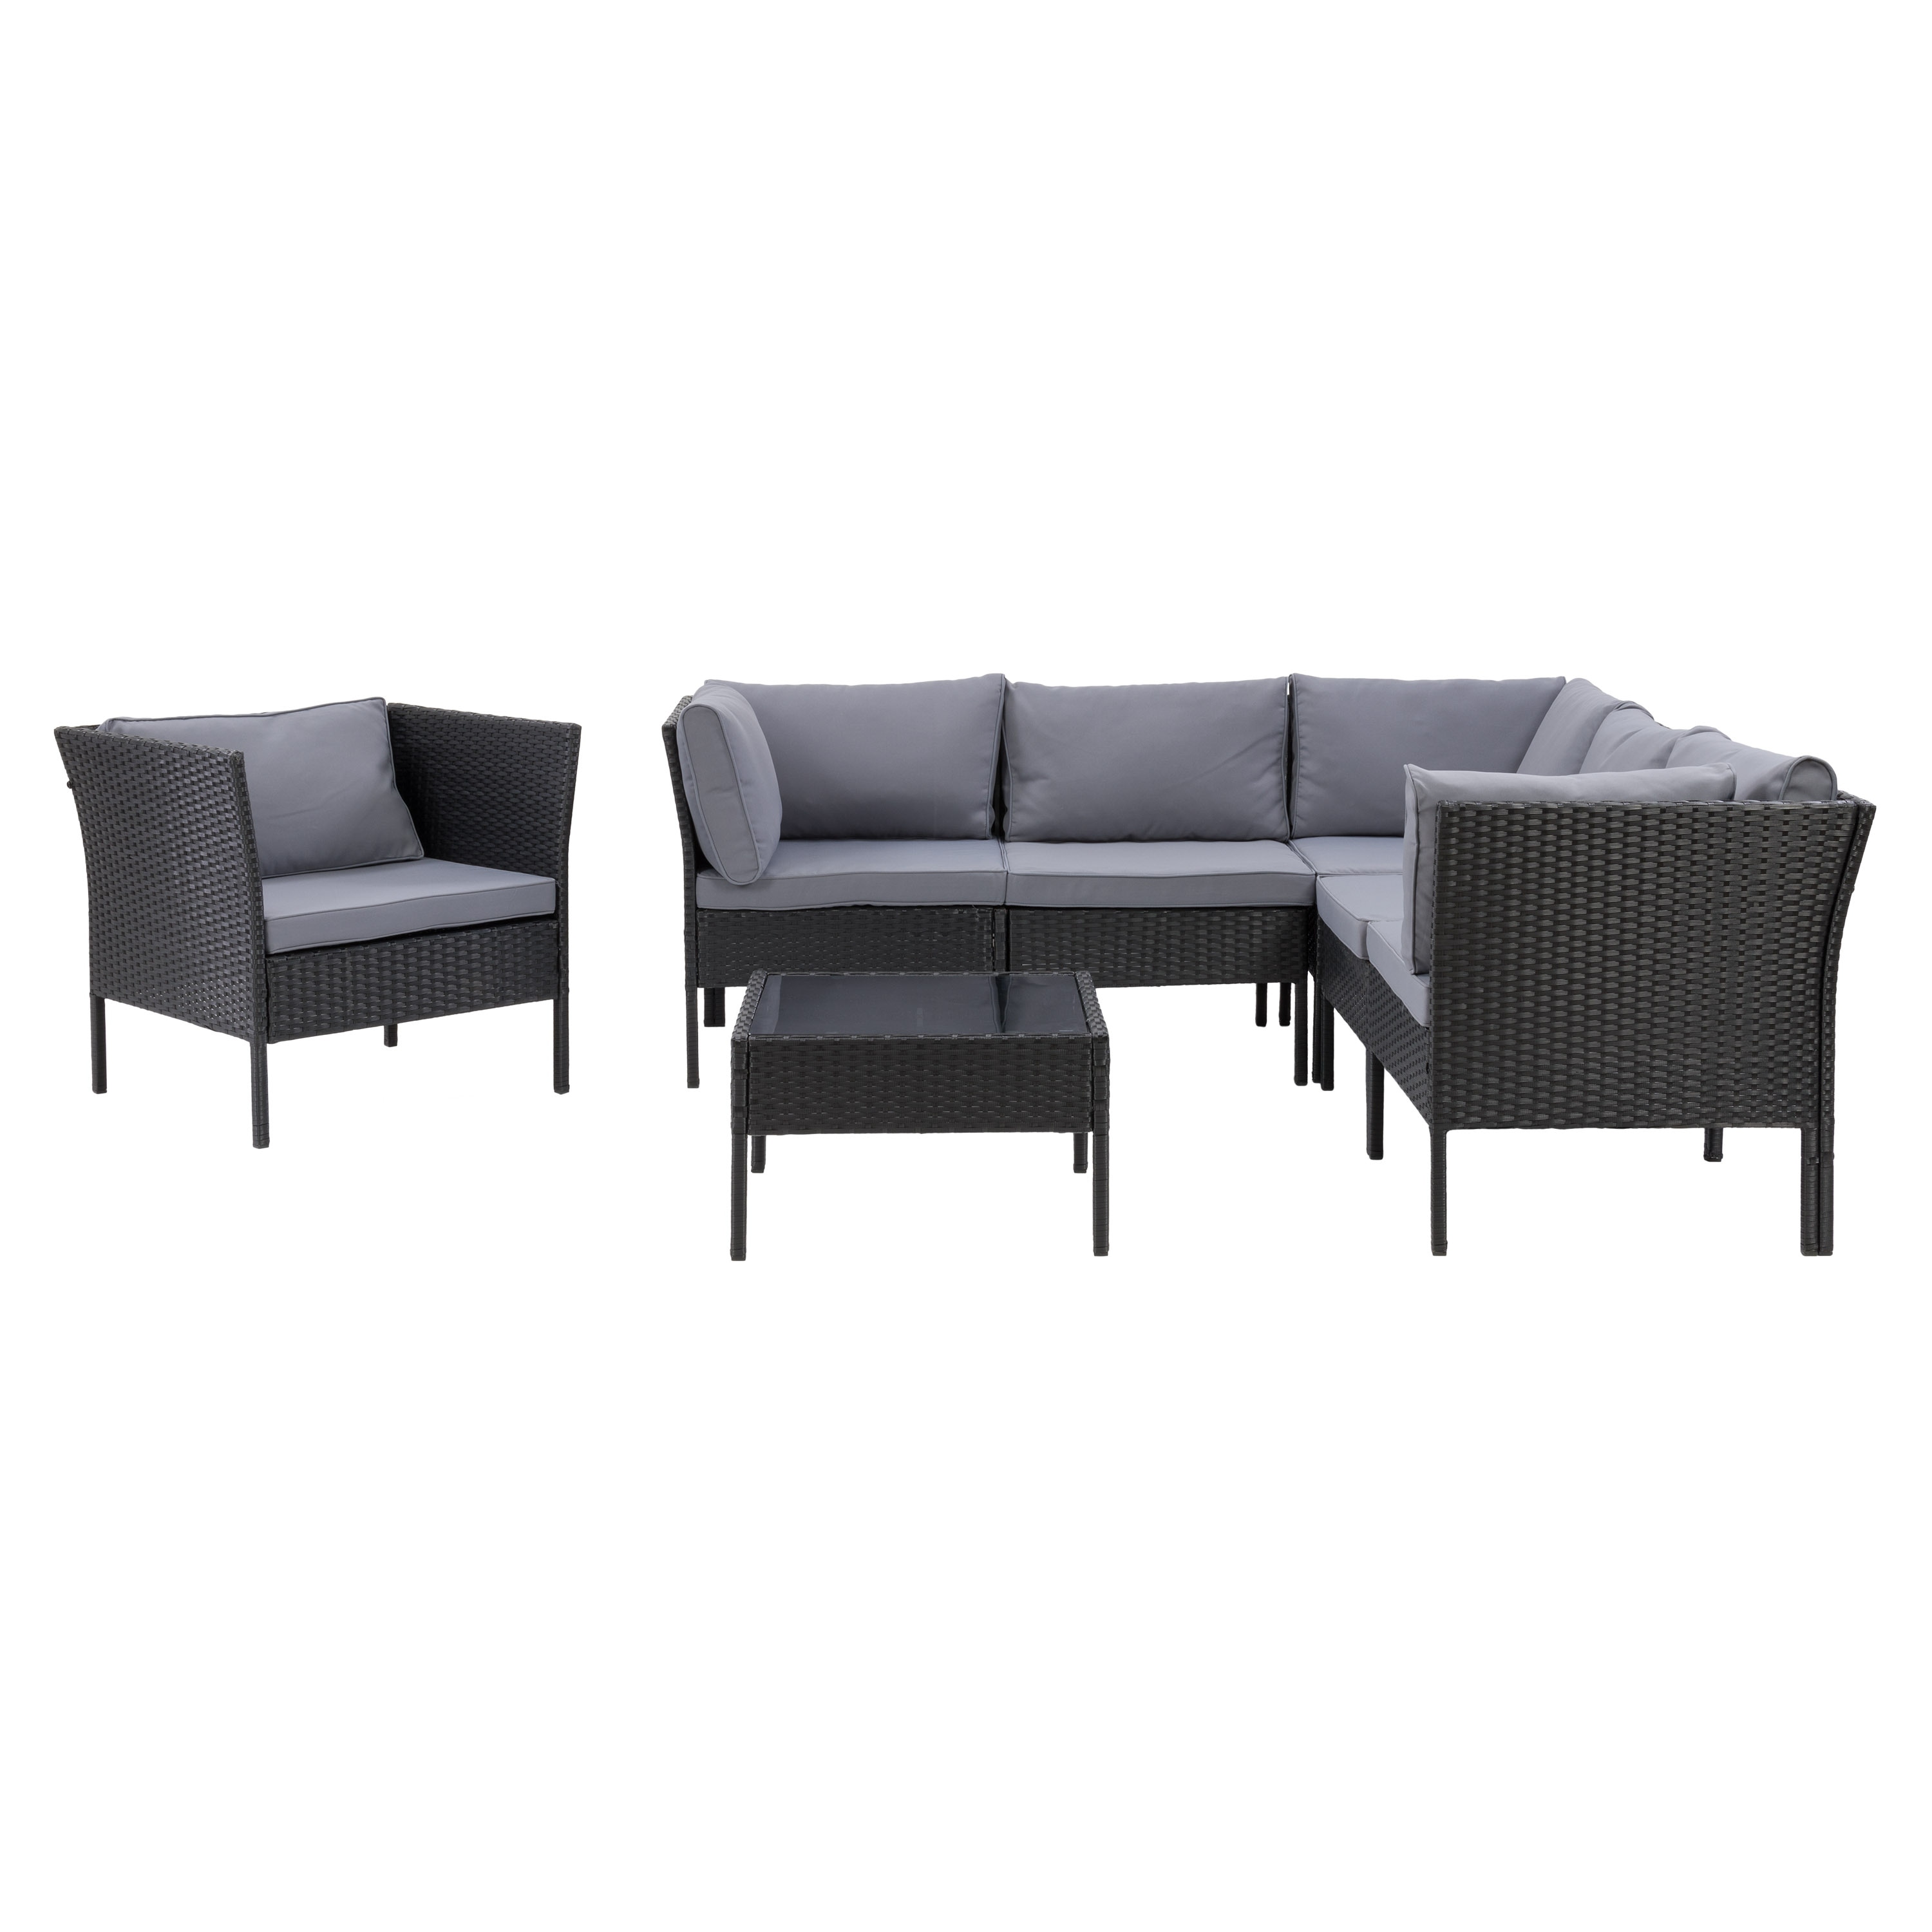 Corliving Black Parksville L-shaped Patio Sectional Set With Chair 7pc